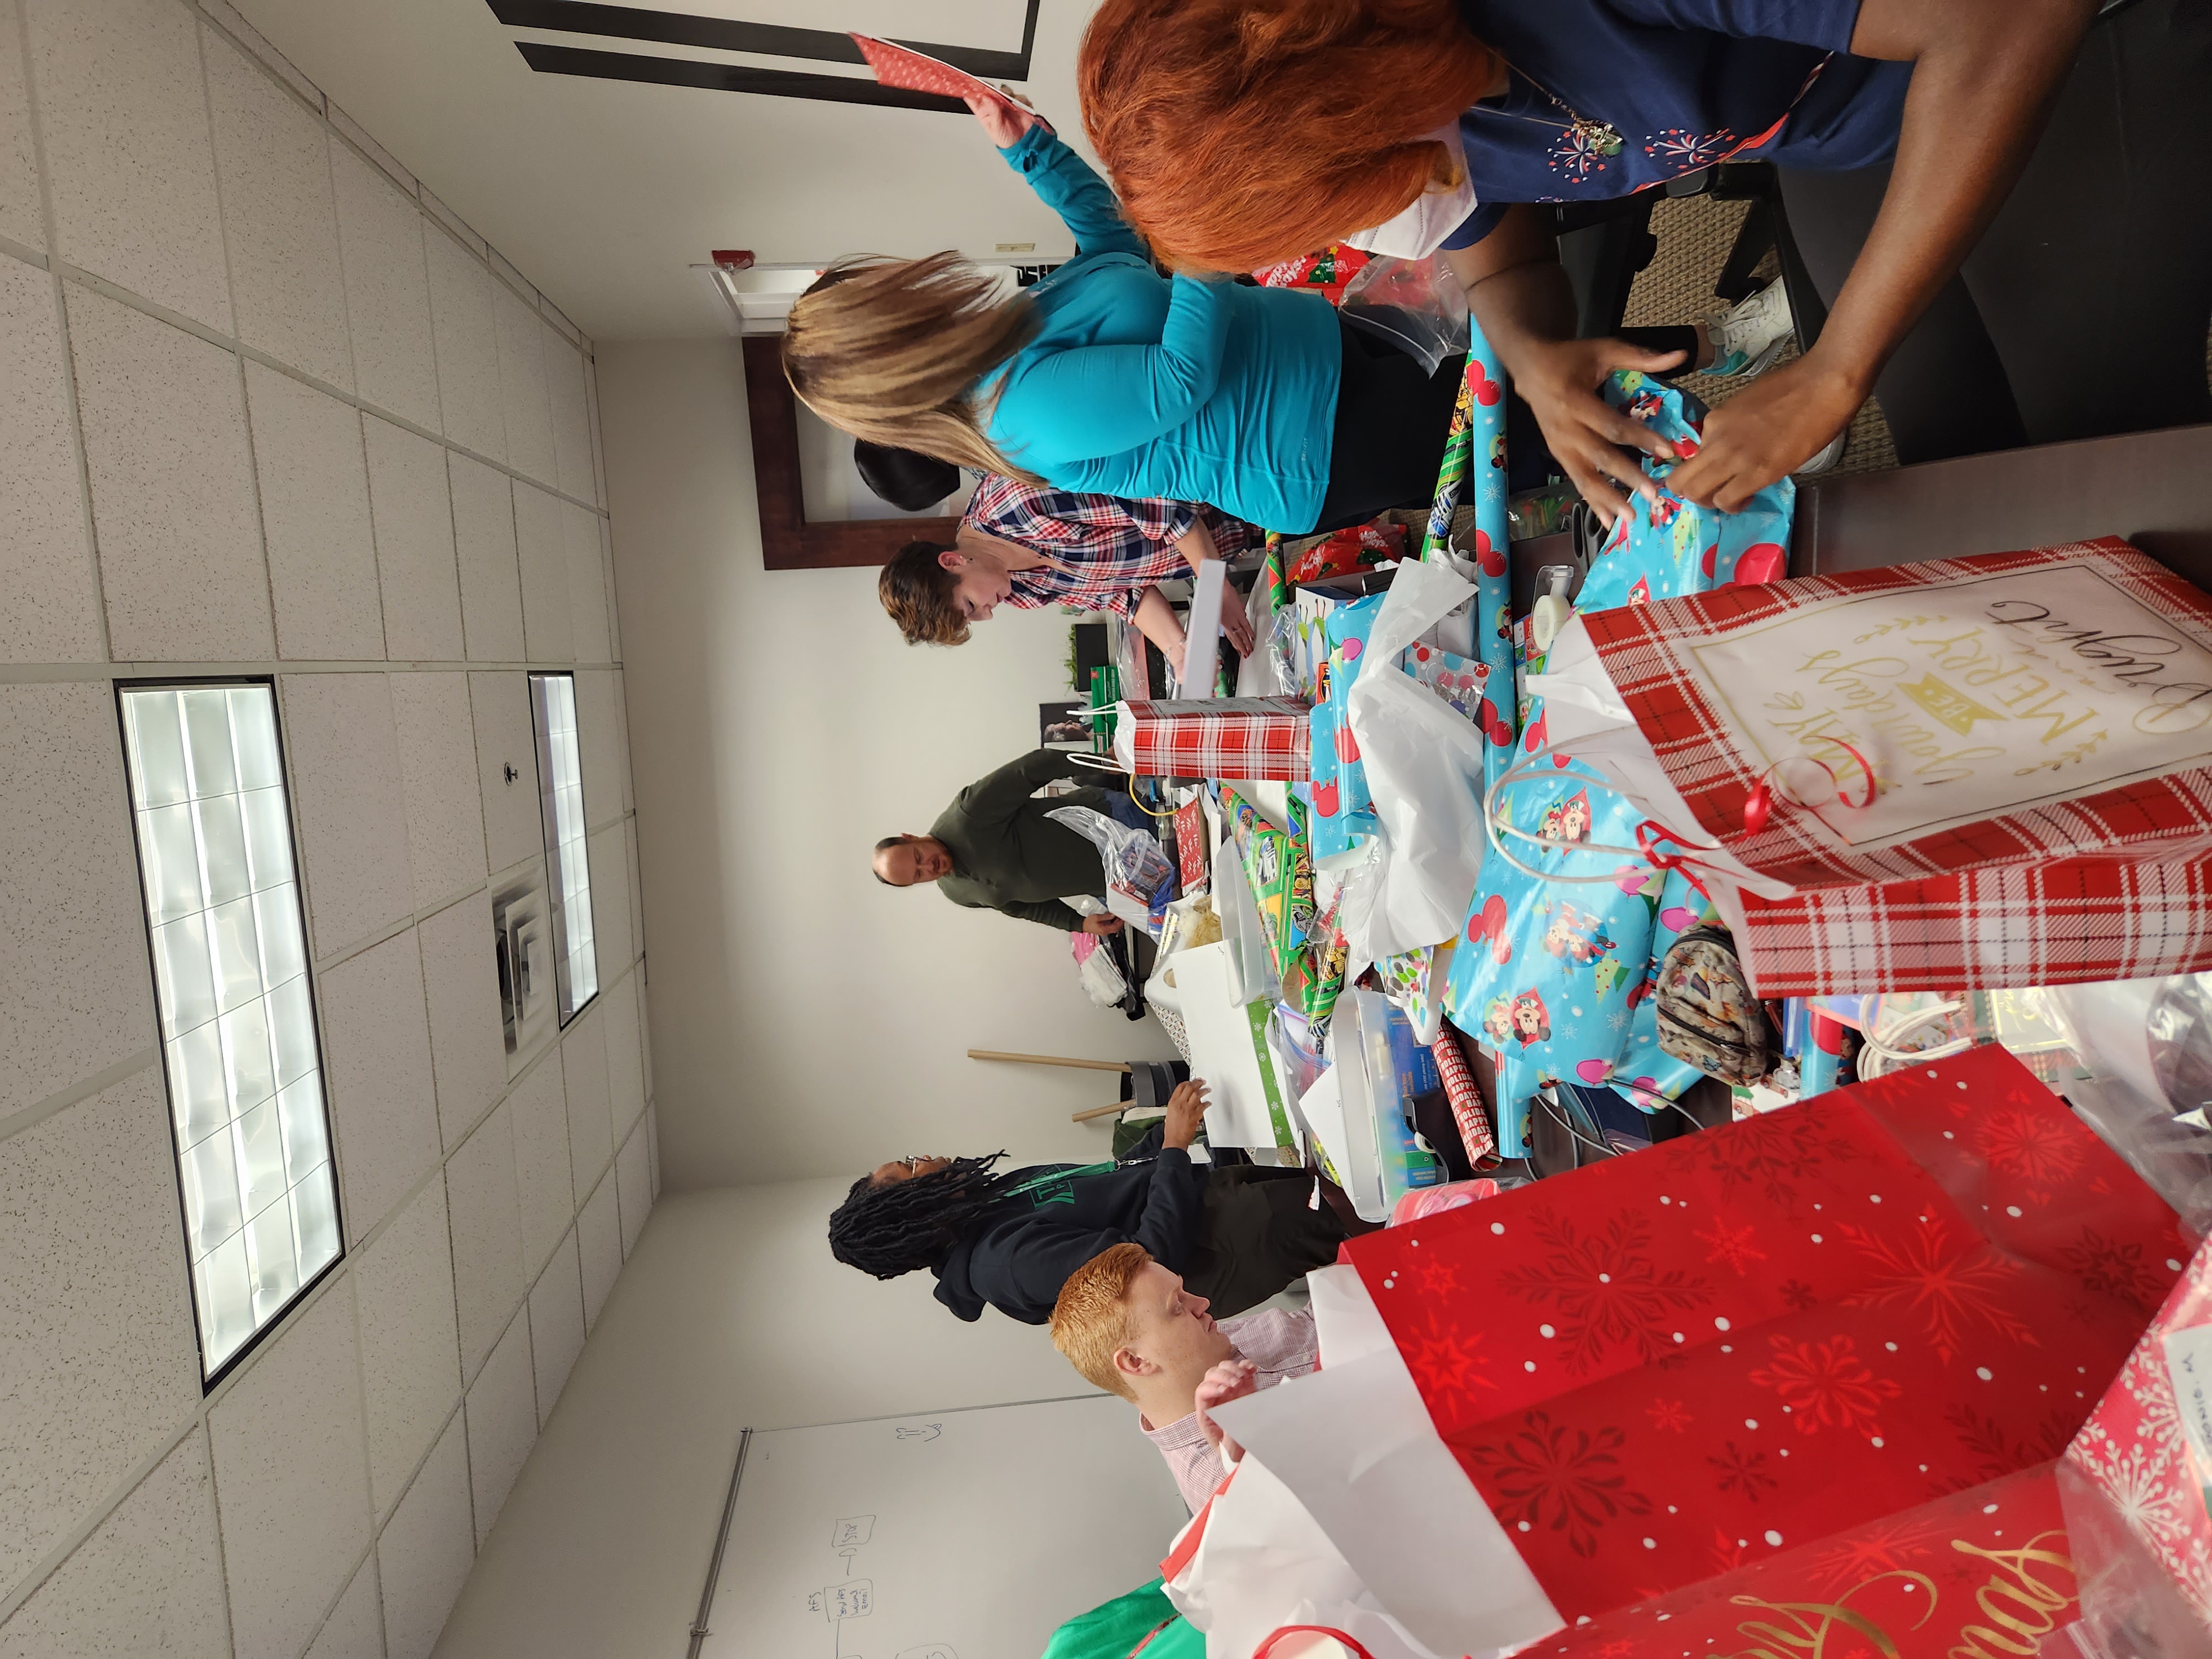 Volunteers wrap gifts for the children.